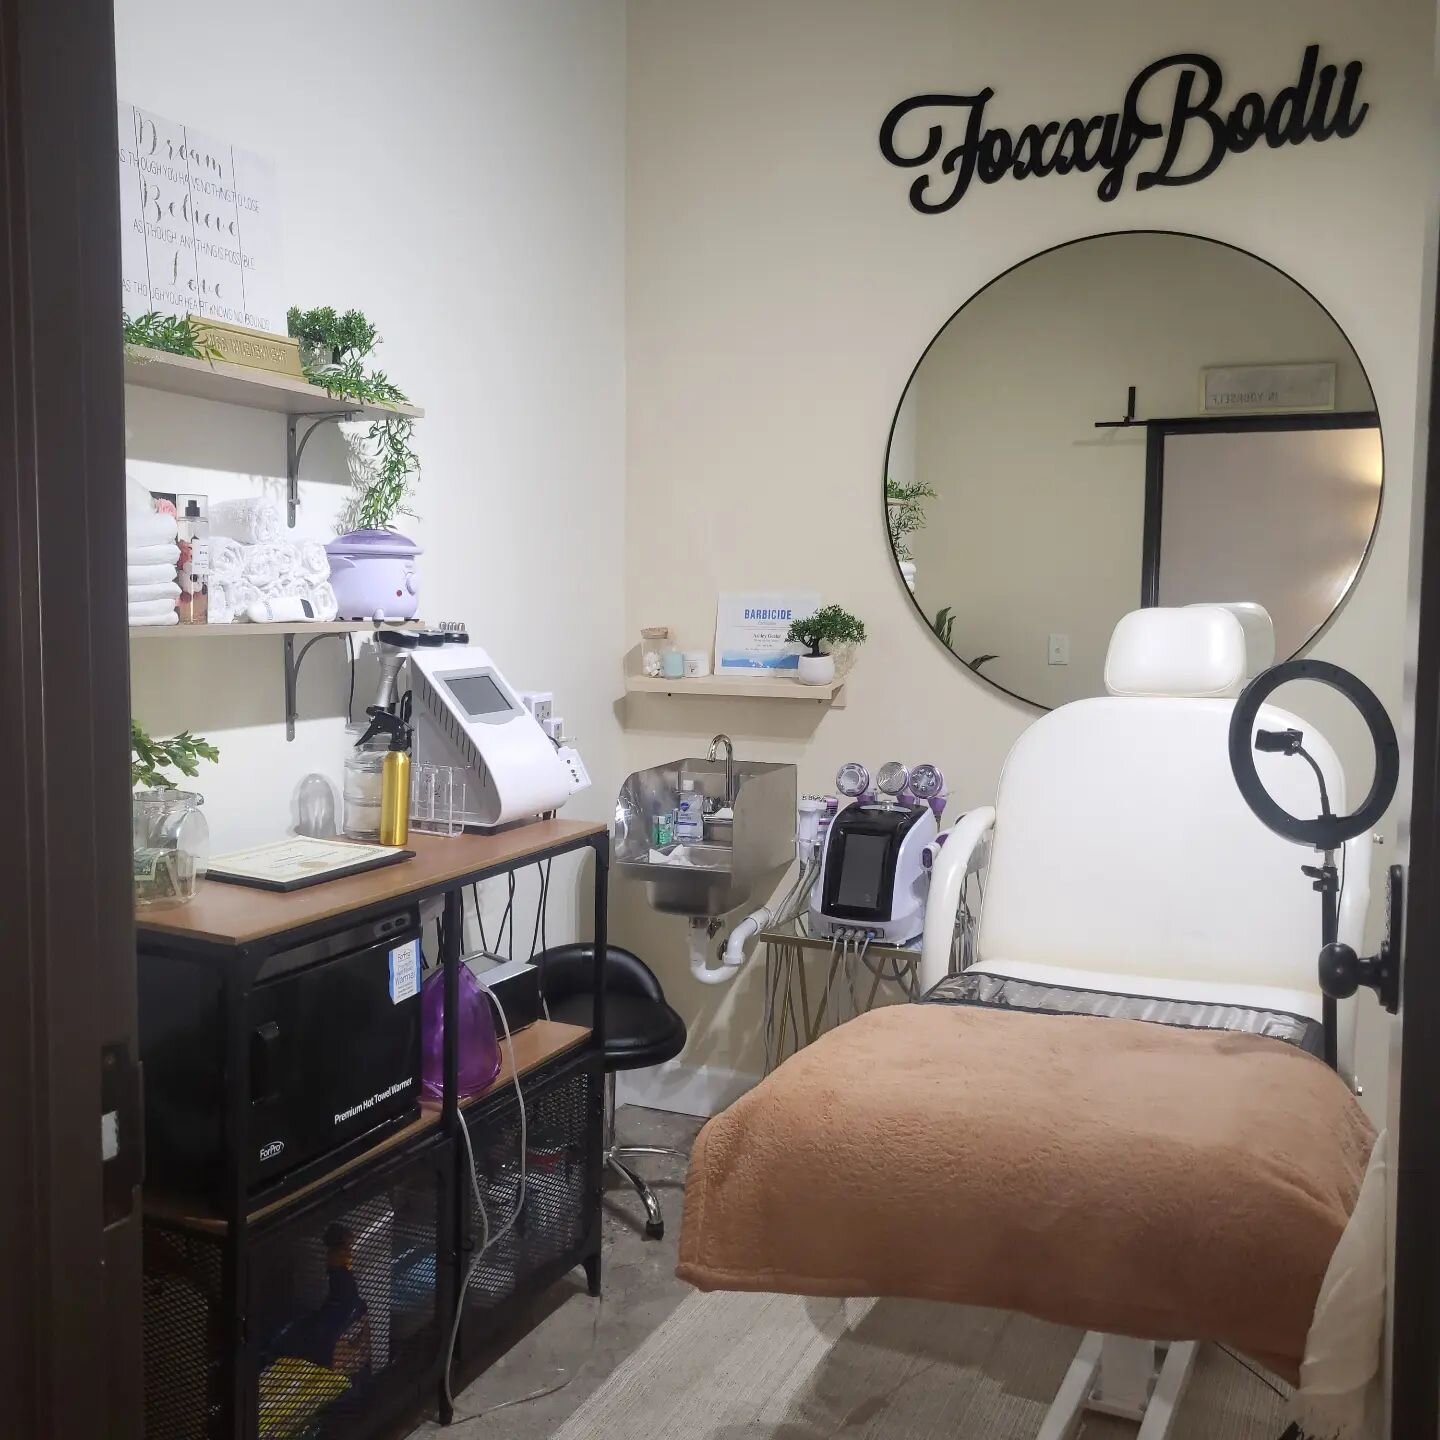 Suite 14! Non invasive body contour and buttlift service @foxxybodii, please come to check us out!